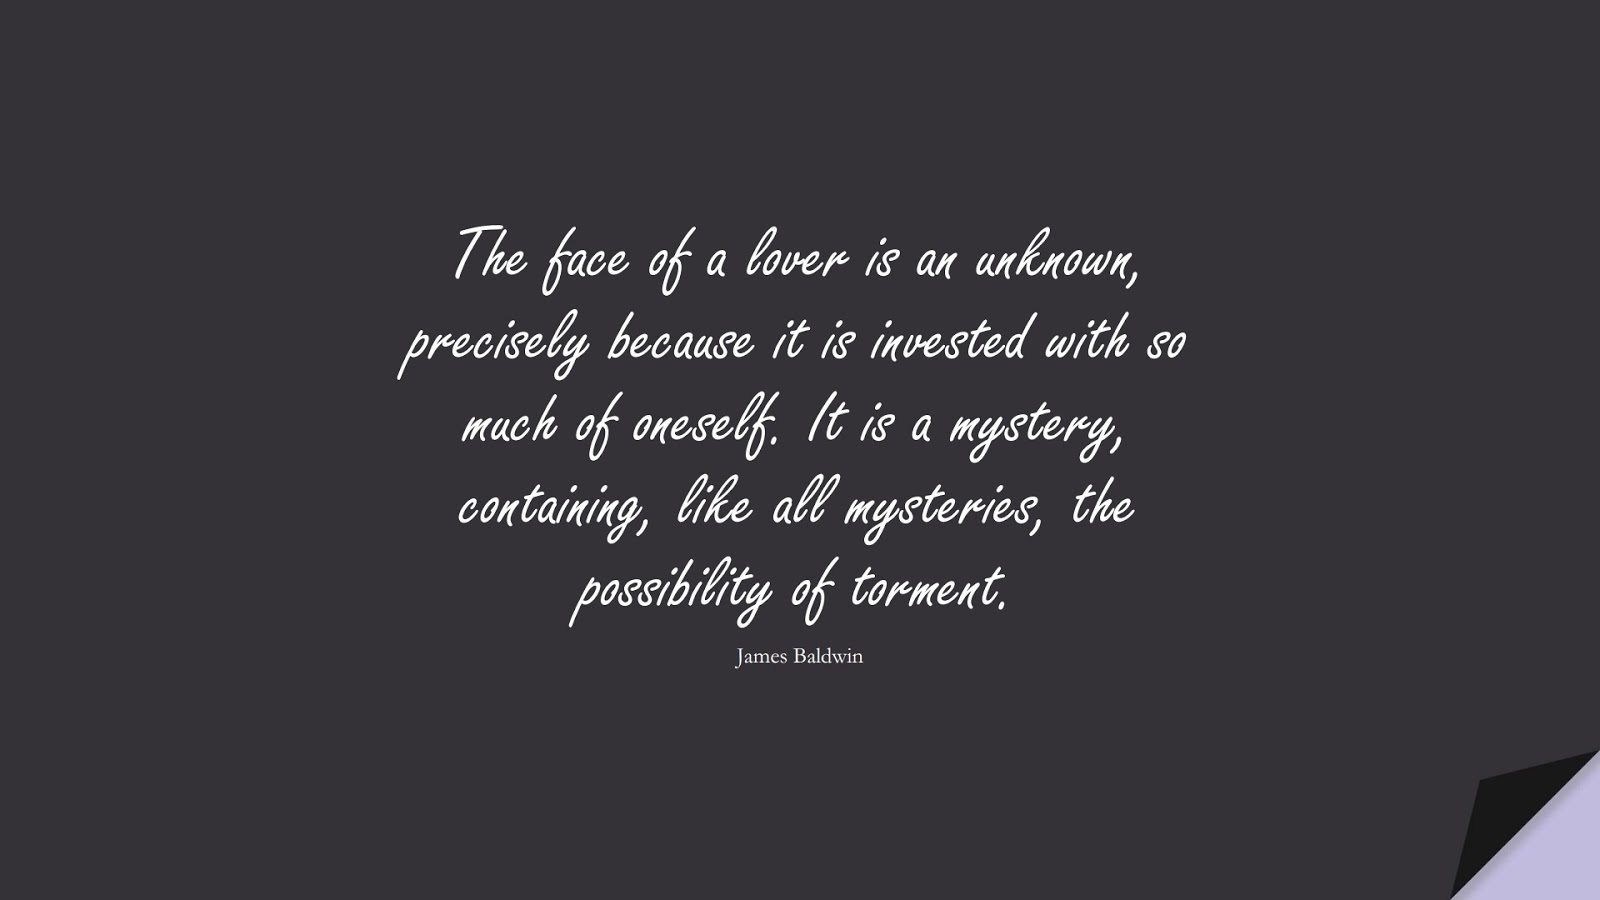 The face of a lover is an unknown, precisely because it is invested with so much of oneself. It is a mystery, containing, like all mysteries, the possibility of torment. (James Baldwin);  #LoveQuotes